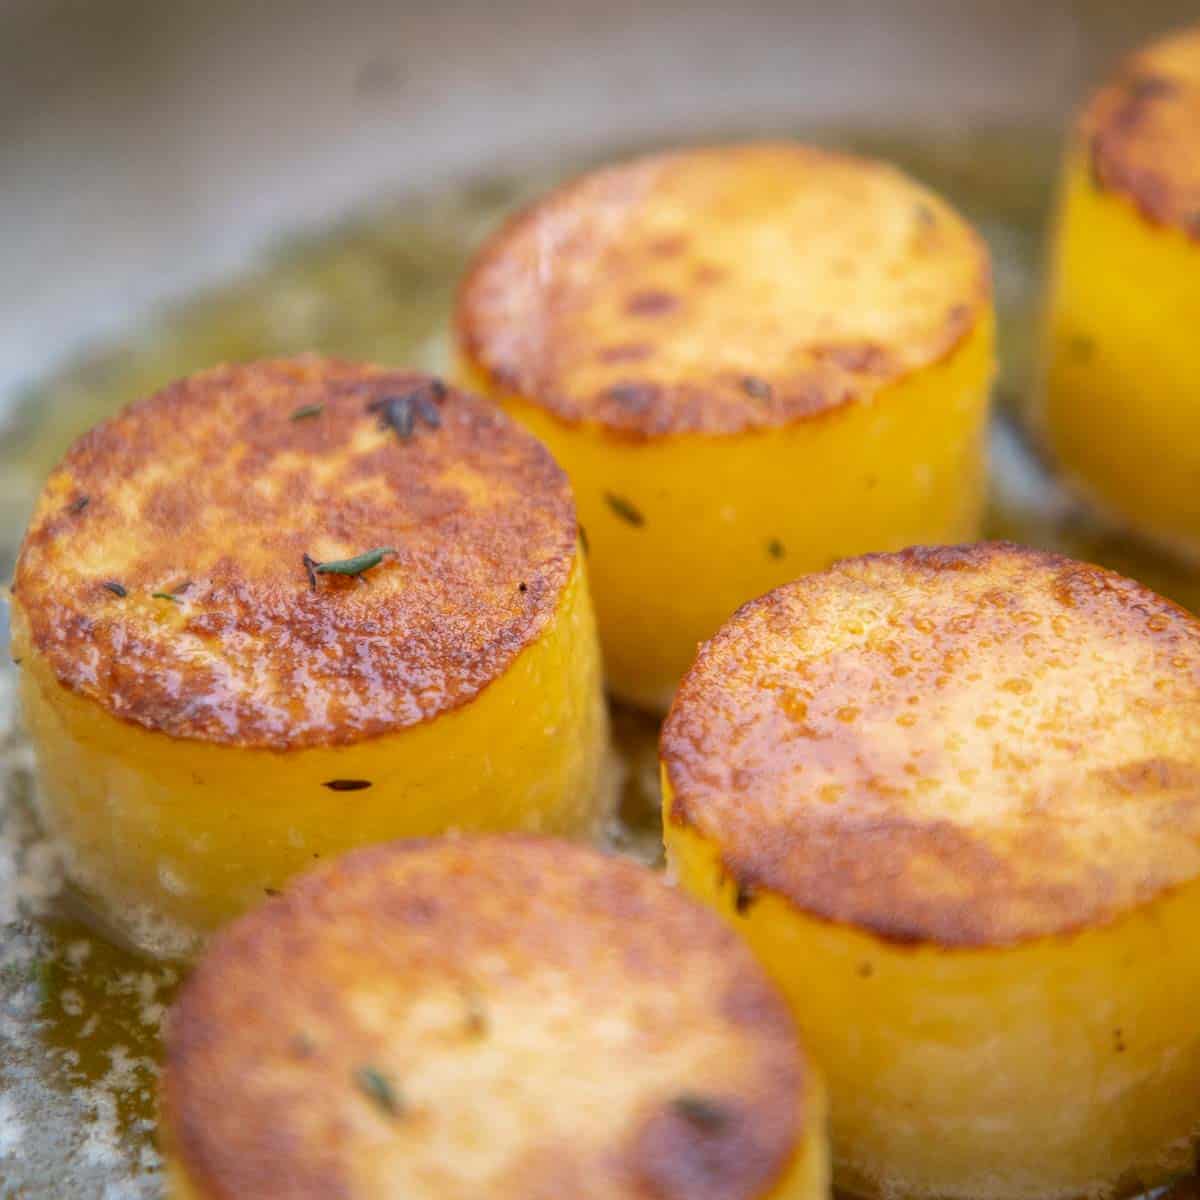 Stock added to fondant potatoes in a pan.